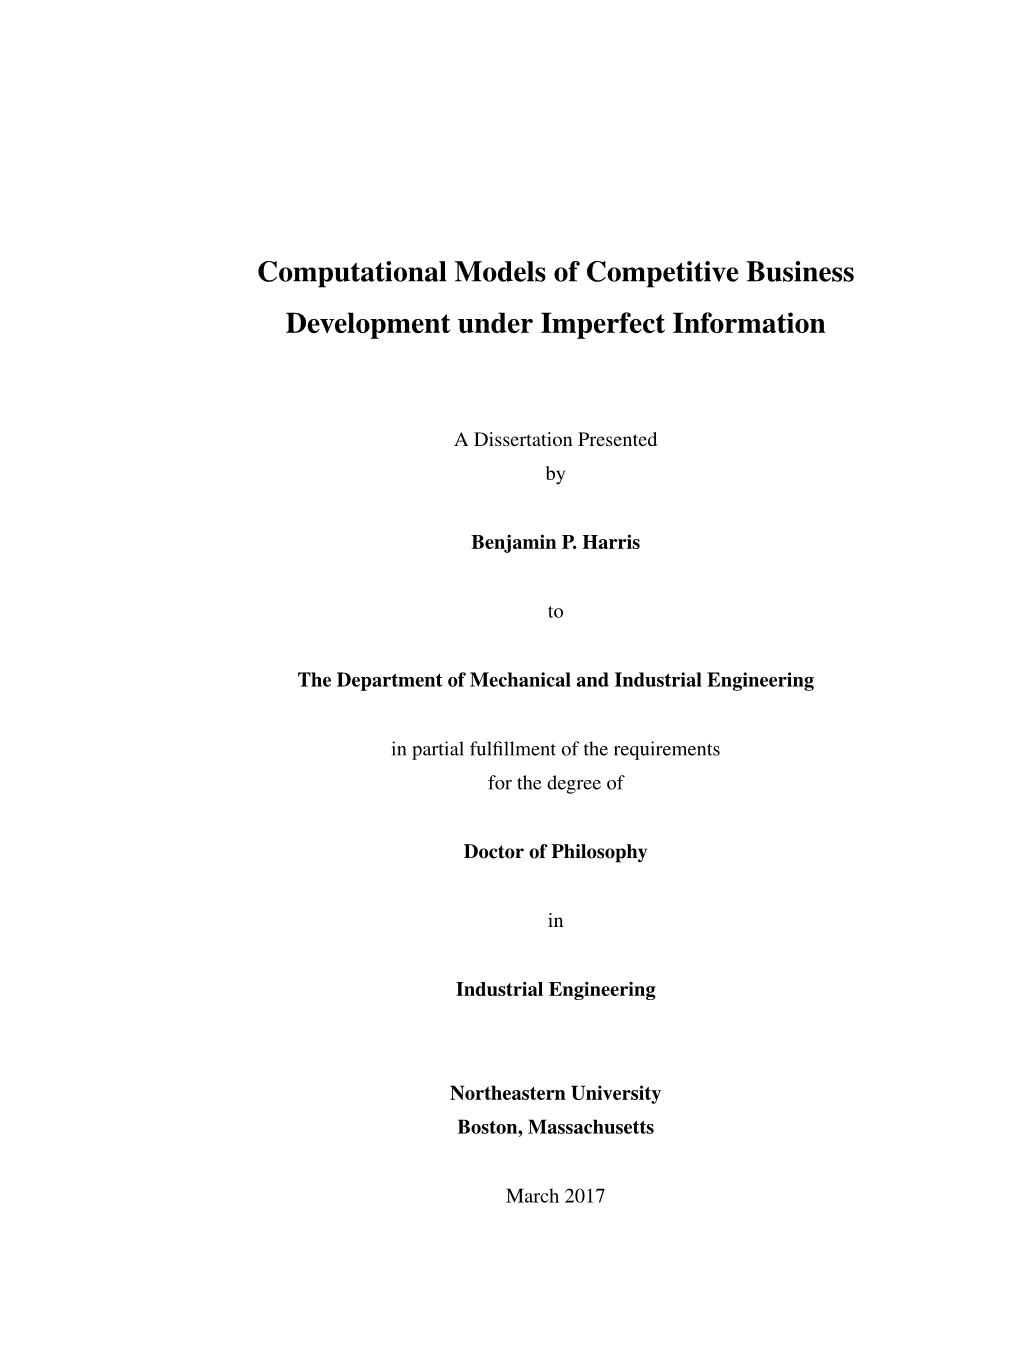 Computational Models of Competitive Business Development Under Imperfect Information